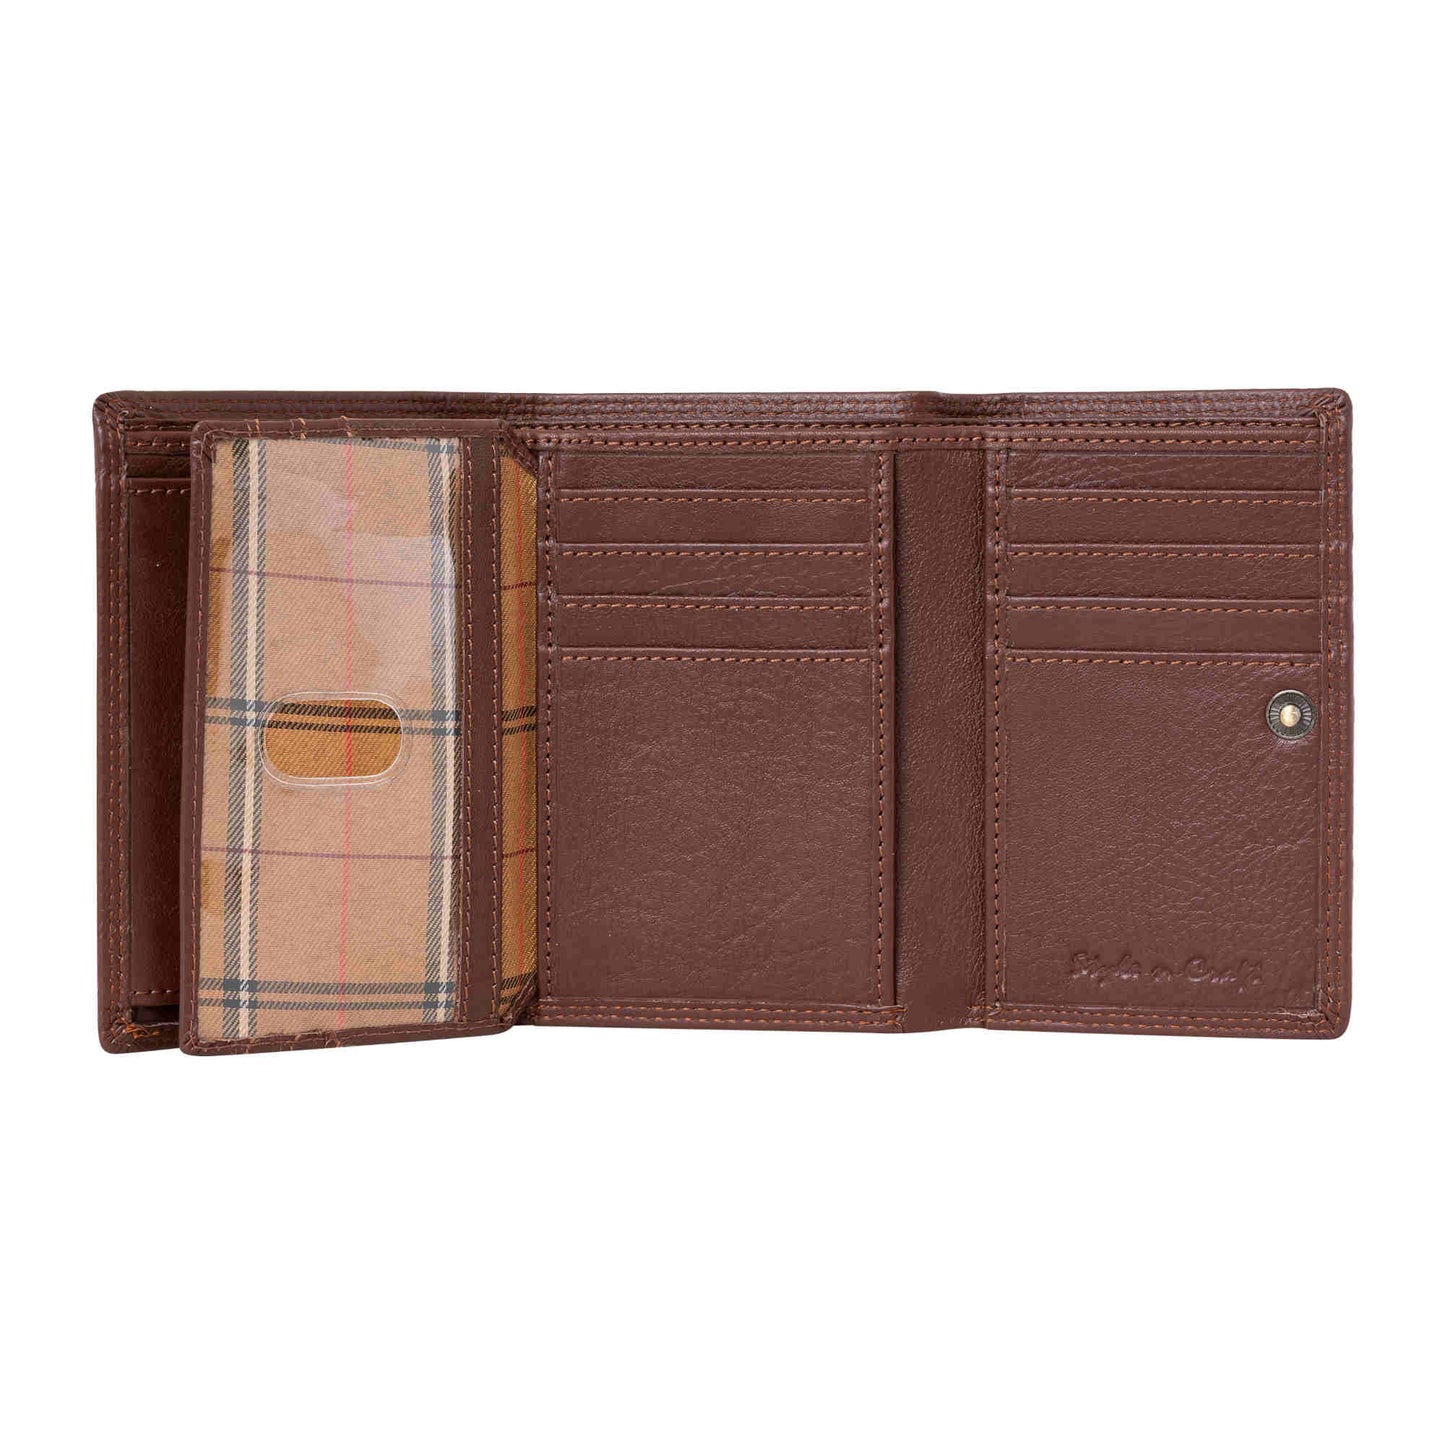 Style n Craft 391109 Ladies Trifold Brown Leather Wallet with Snap Button Closure - Straight Open View 2 - Showing the Credit Card Pockets, ID Window and the Snap Button